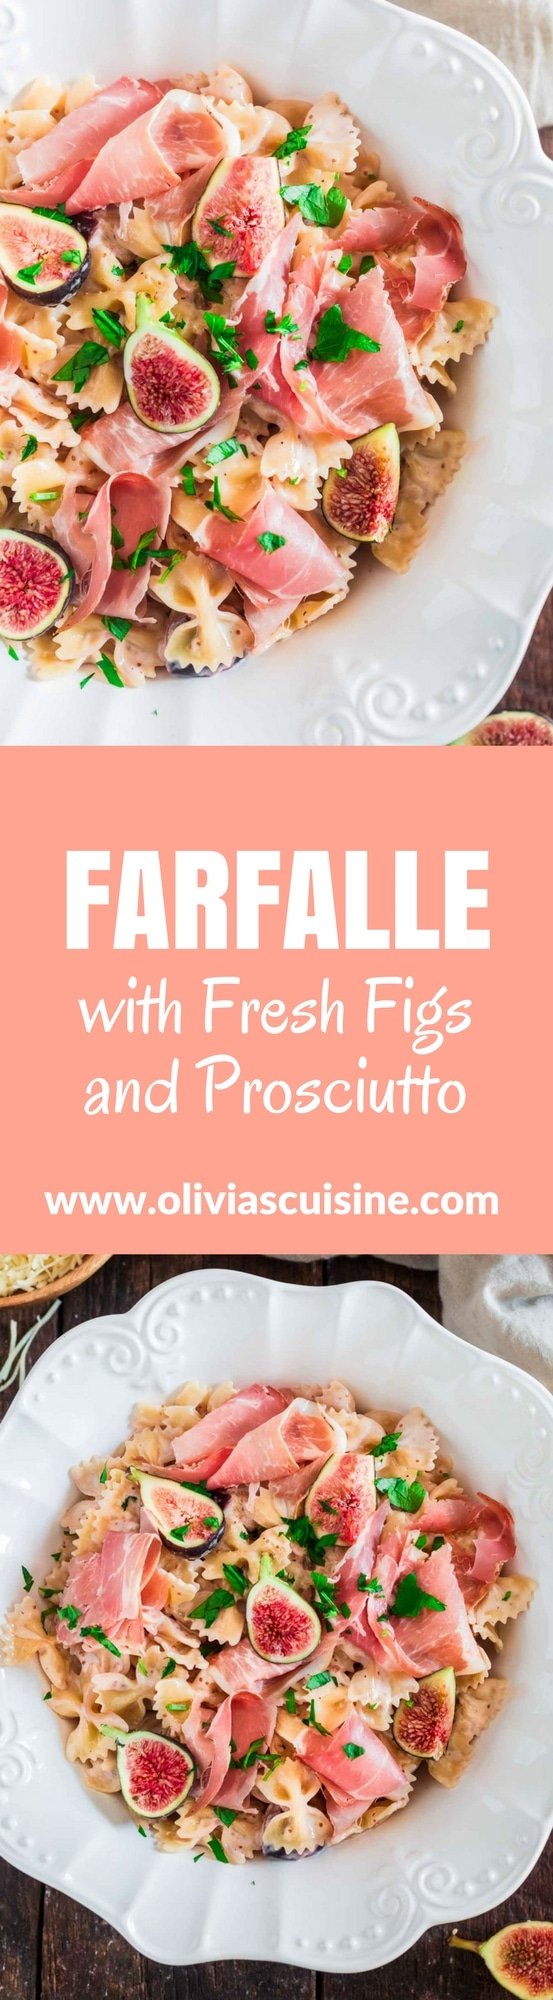 Farfalle with Fresh Figs and Prosciutto | www.oliviascuisine.com | A delicious and easy pasta dish using the sweetest, seasonal figs and salty prosciutto. If you could eat summer, this would be it!